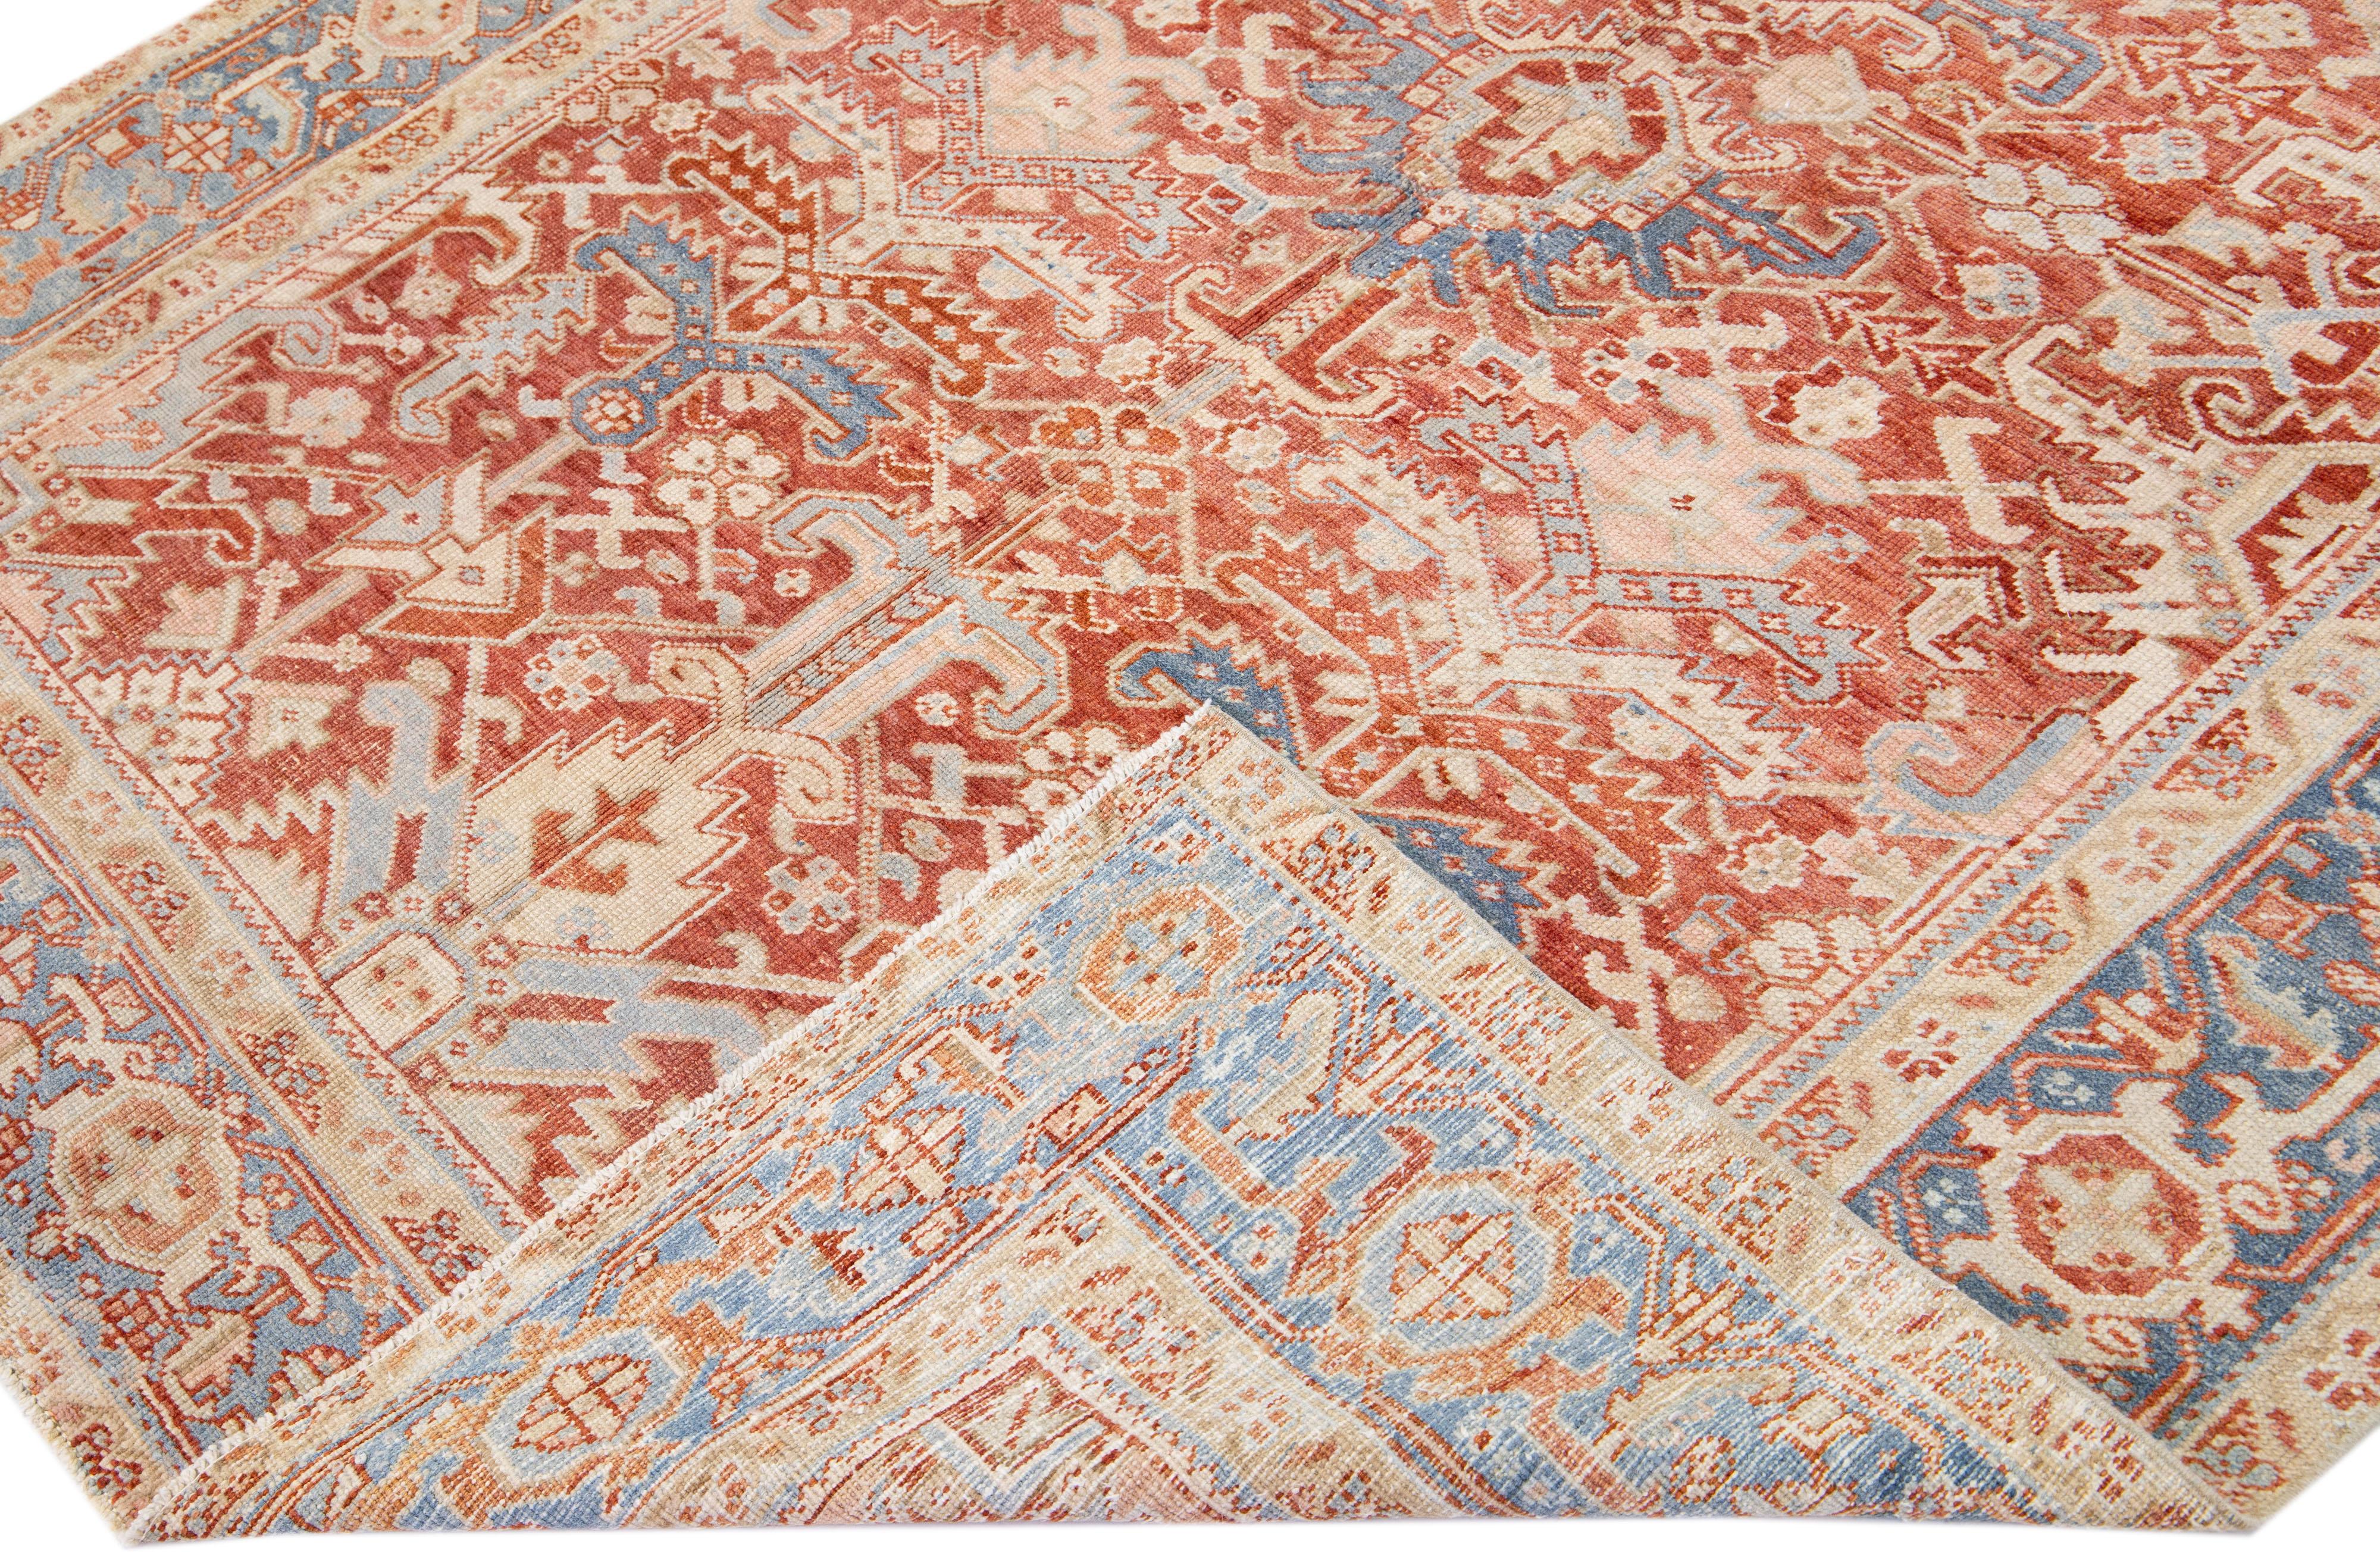 Beautiful antique Heriz hand-knotted wool rug with a rust red color field. This Persian rug has a blue frame with peach accents in a gorgeous all-over floral design.

This rug measures: 6'9